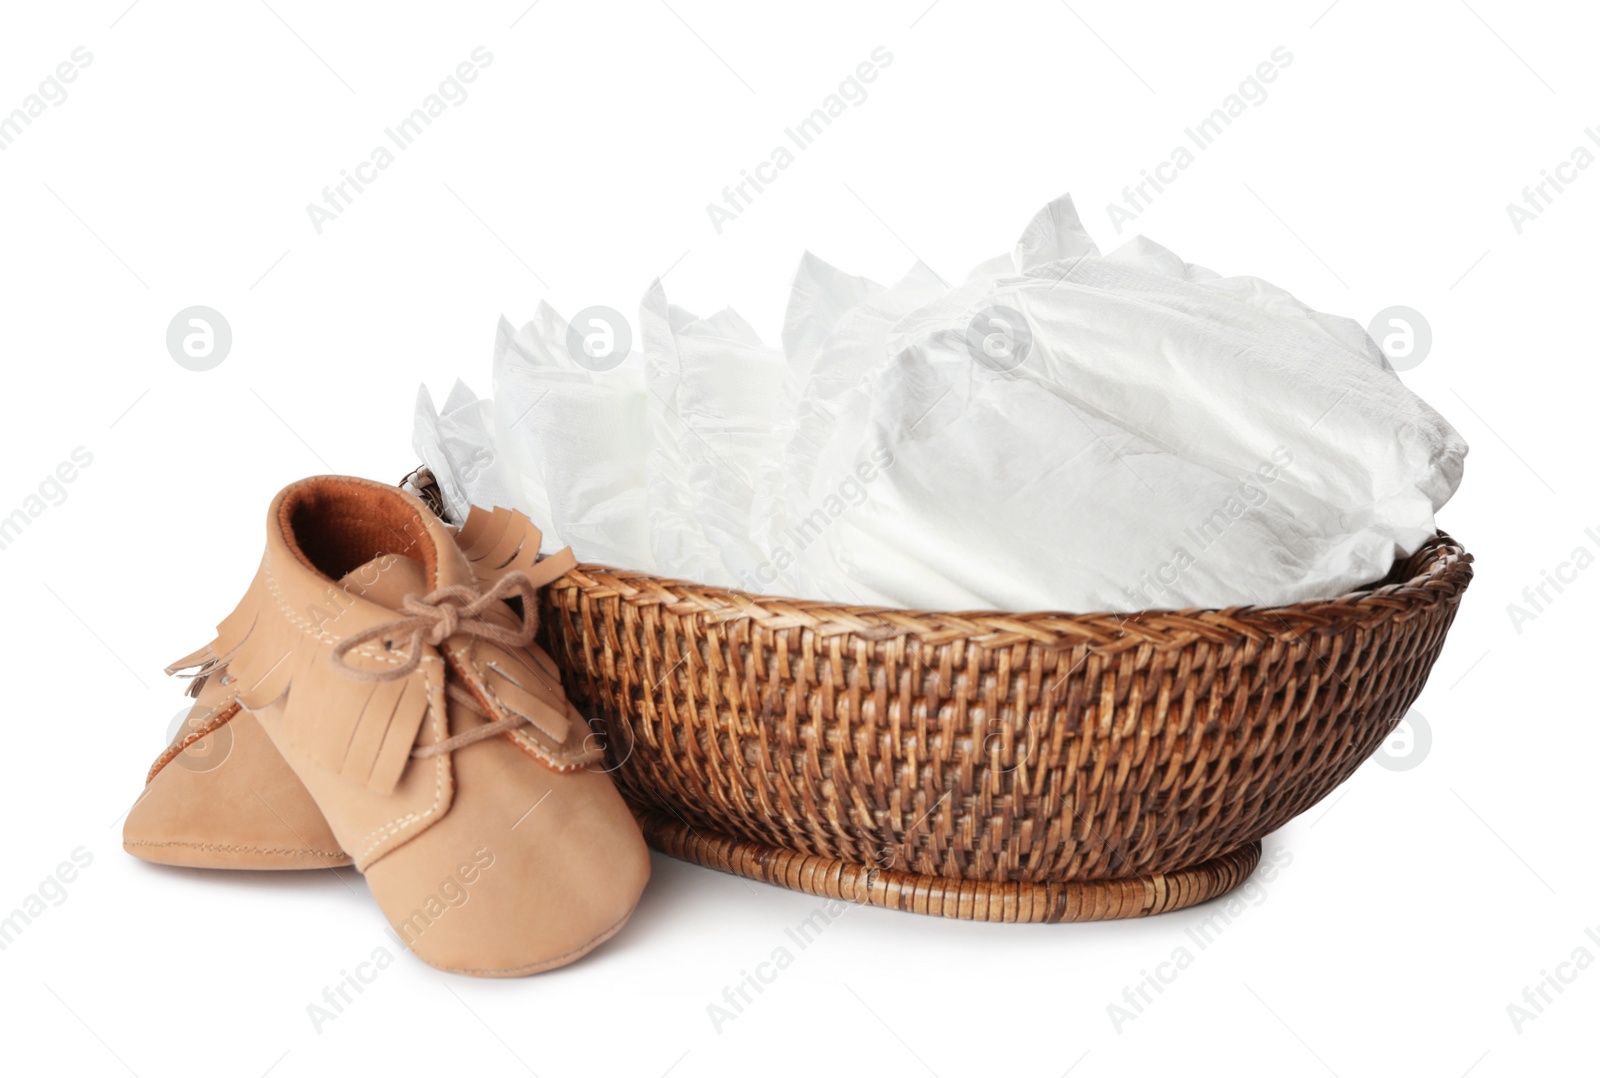 Photo of Wicker bowl with disposable diapers and child's shoes on white background